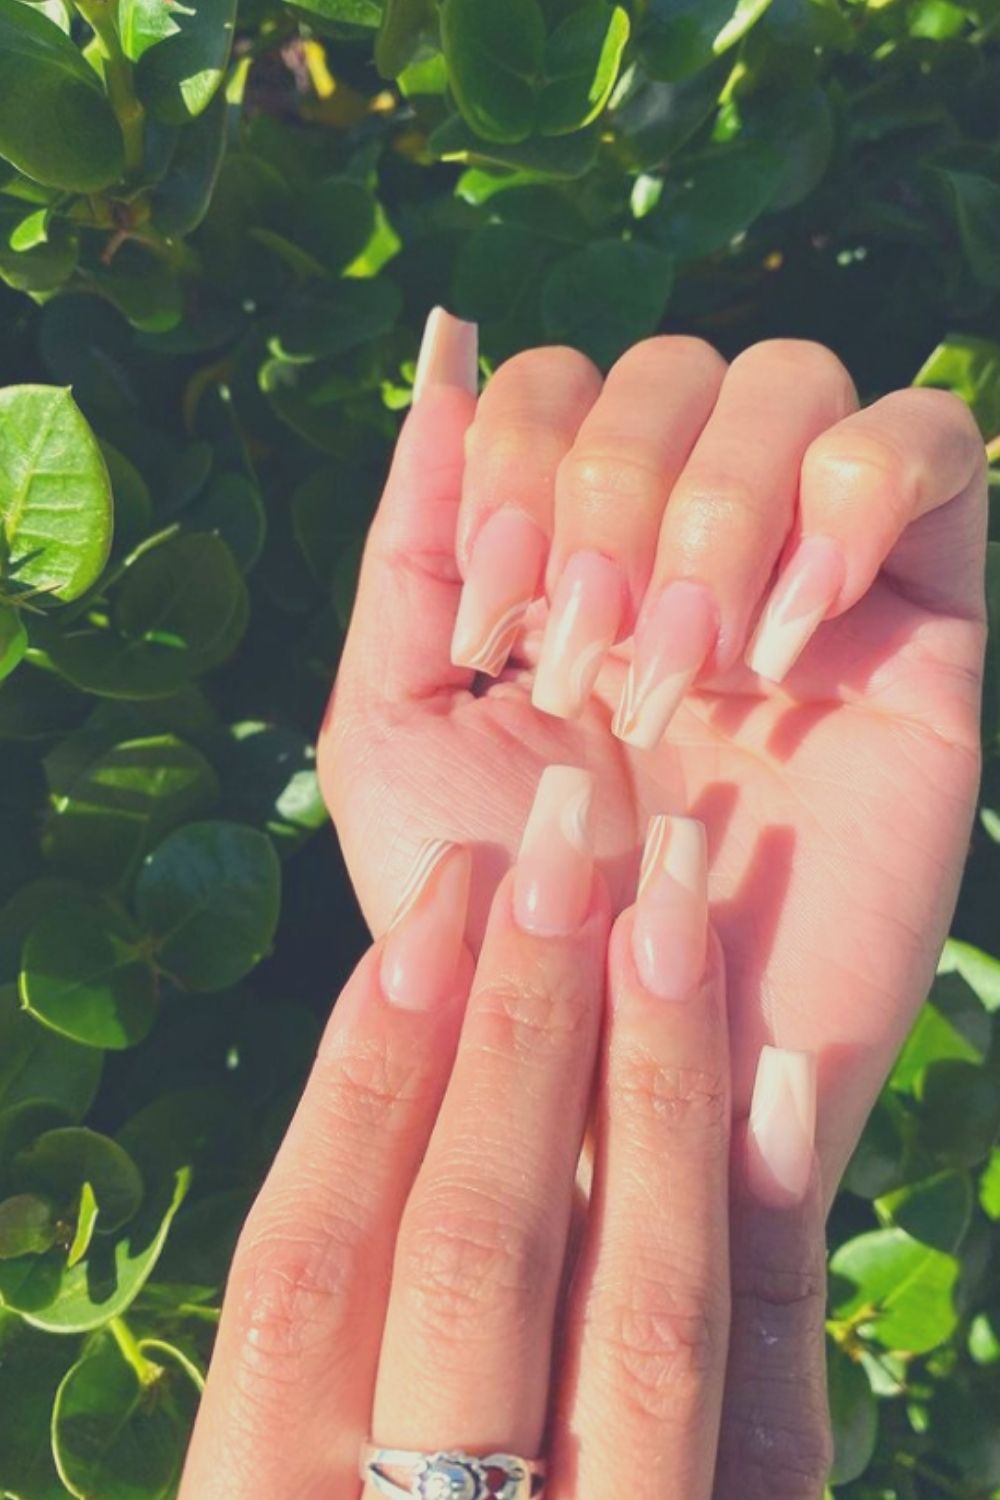 35 Clear acrylic nails are a natural way to try them in 2021